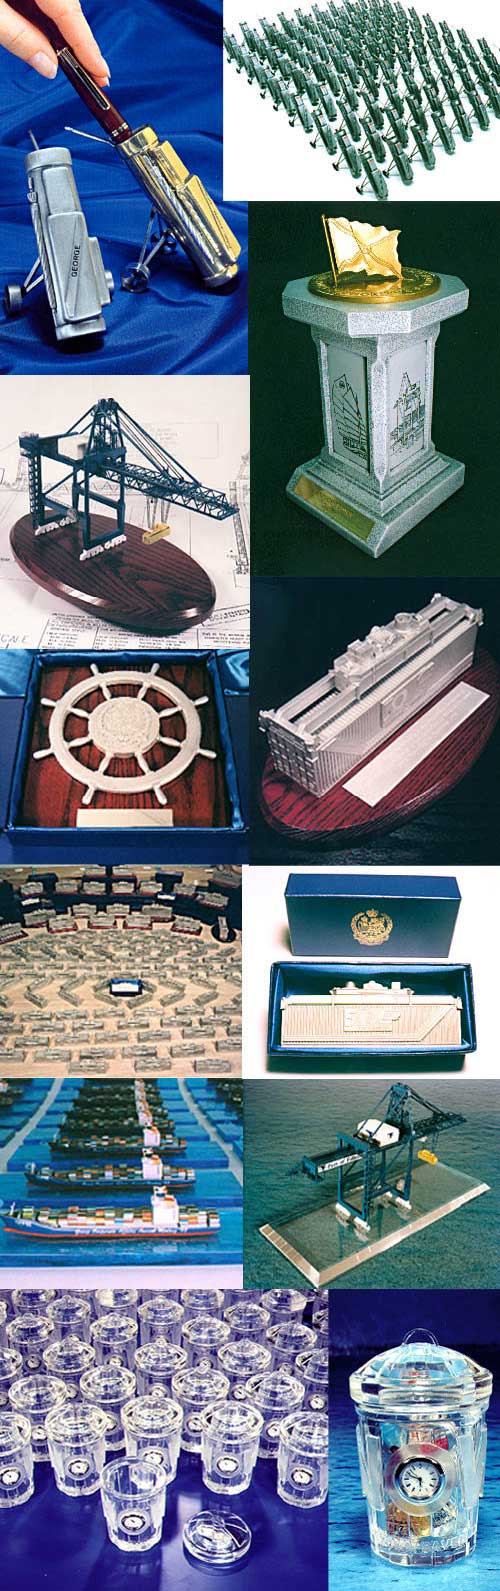 Photograph strip of a variety of corporate gifts